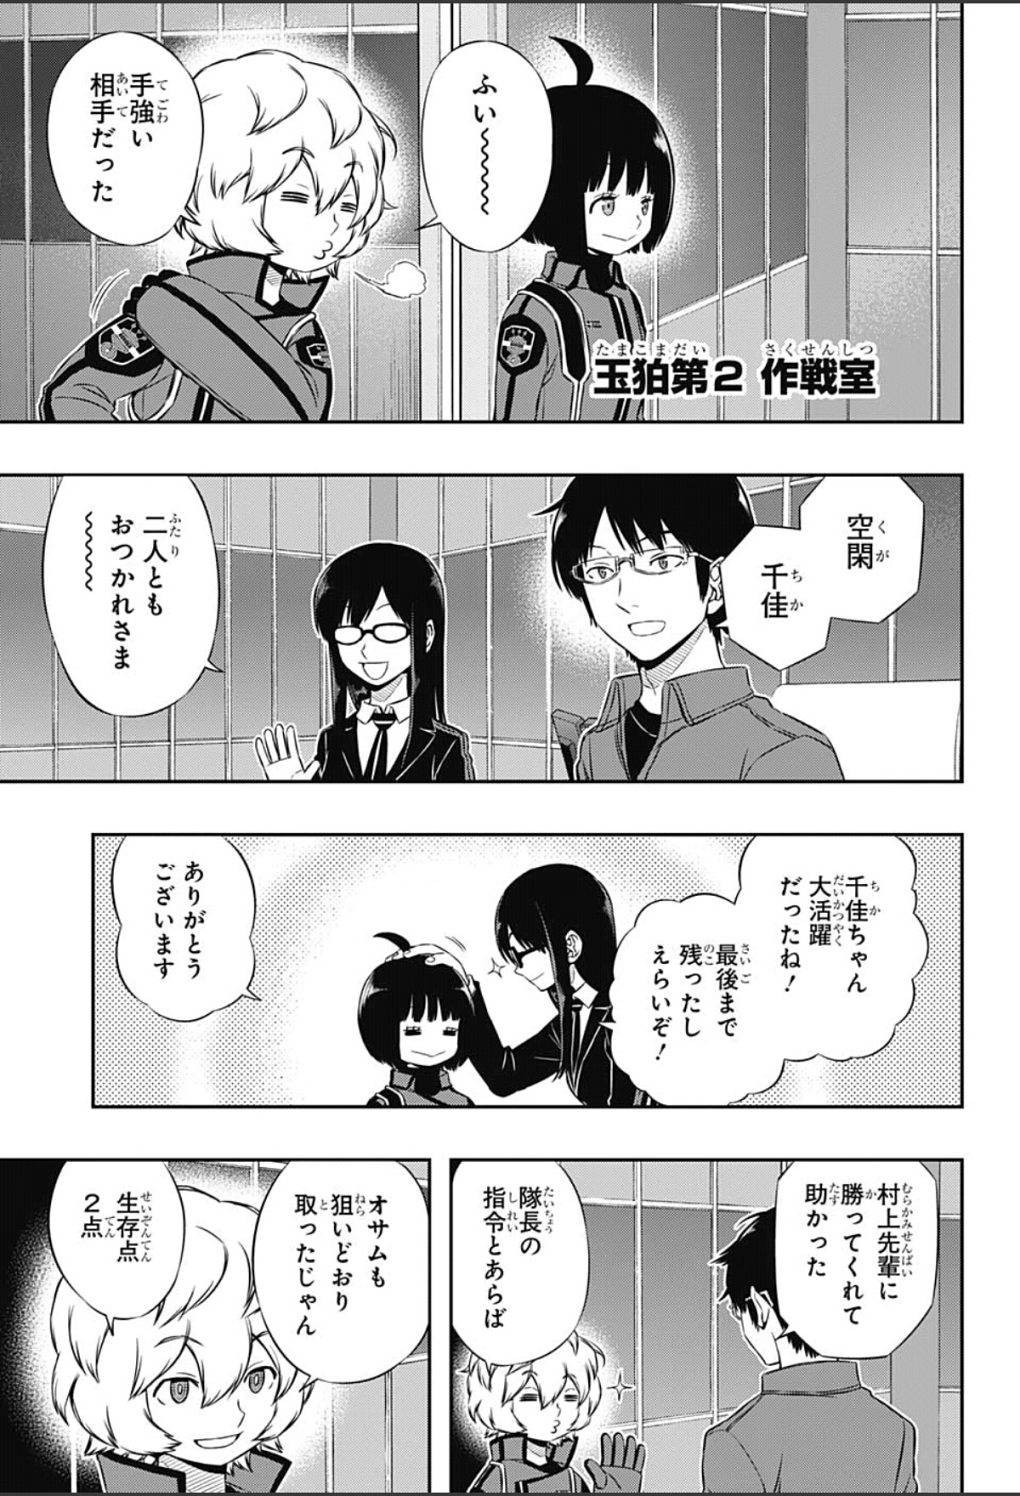 World Trigger - Chapter 103 - Page 4